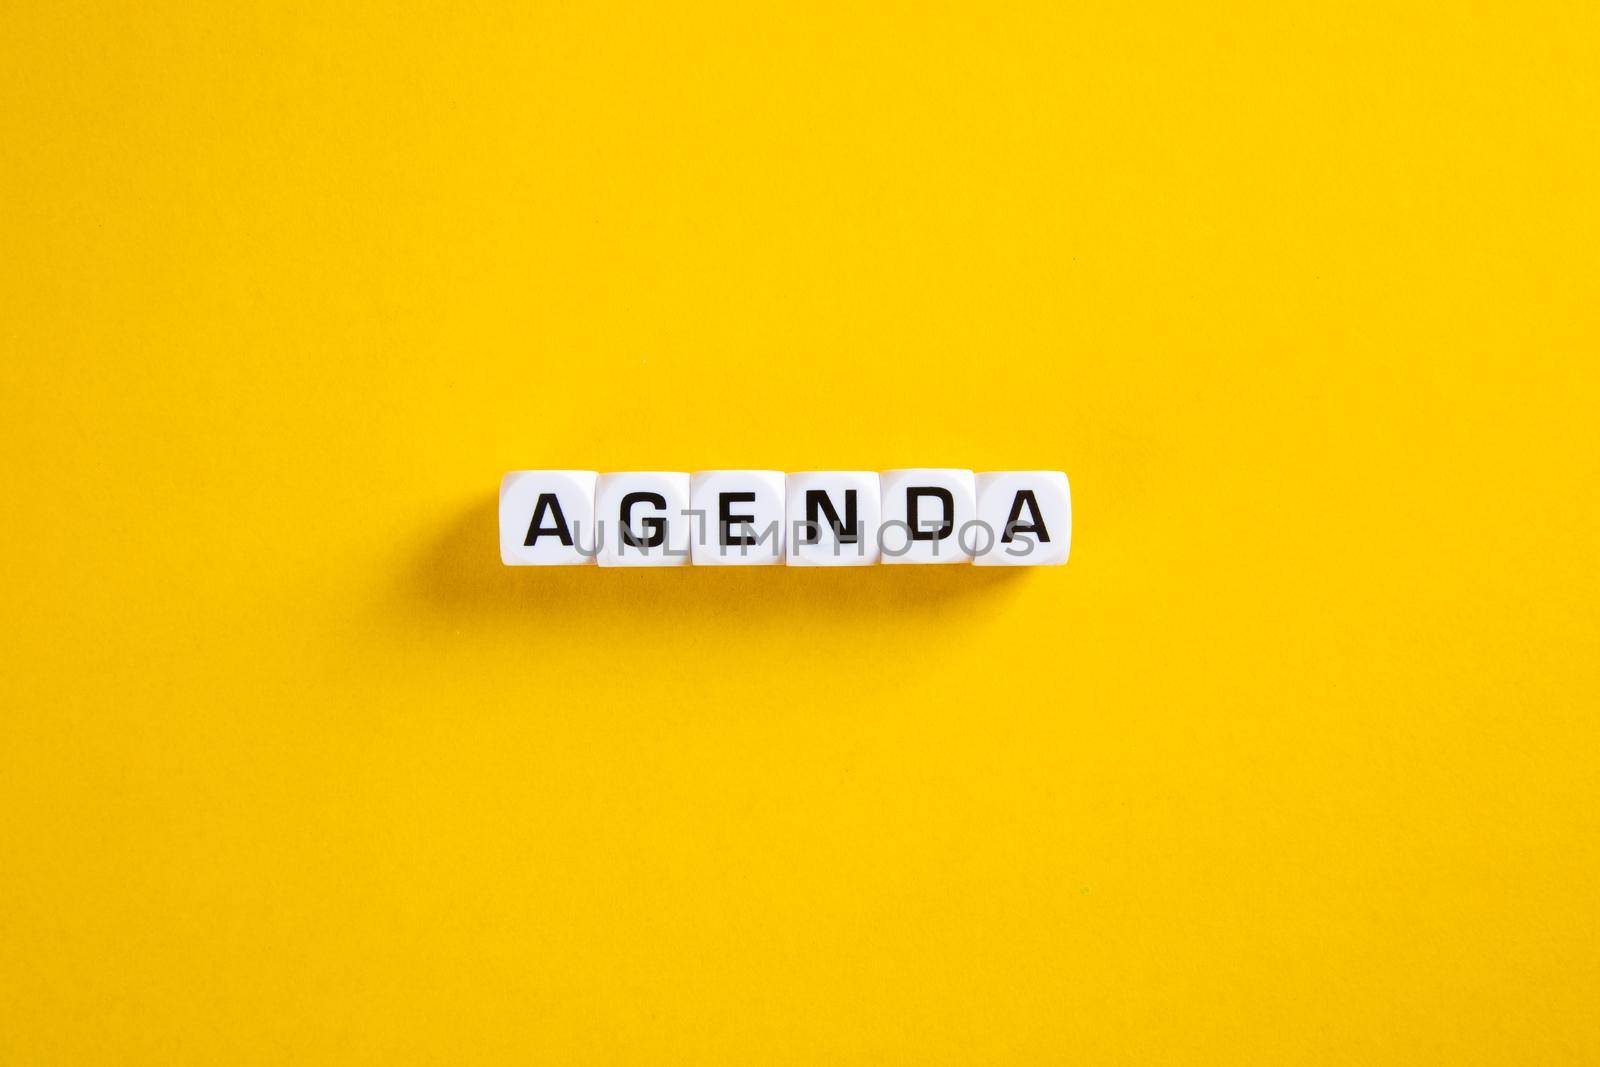 Agenda word on yellow background by tehcheesiong